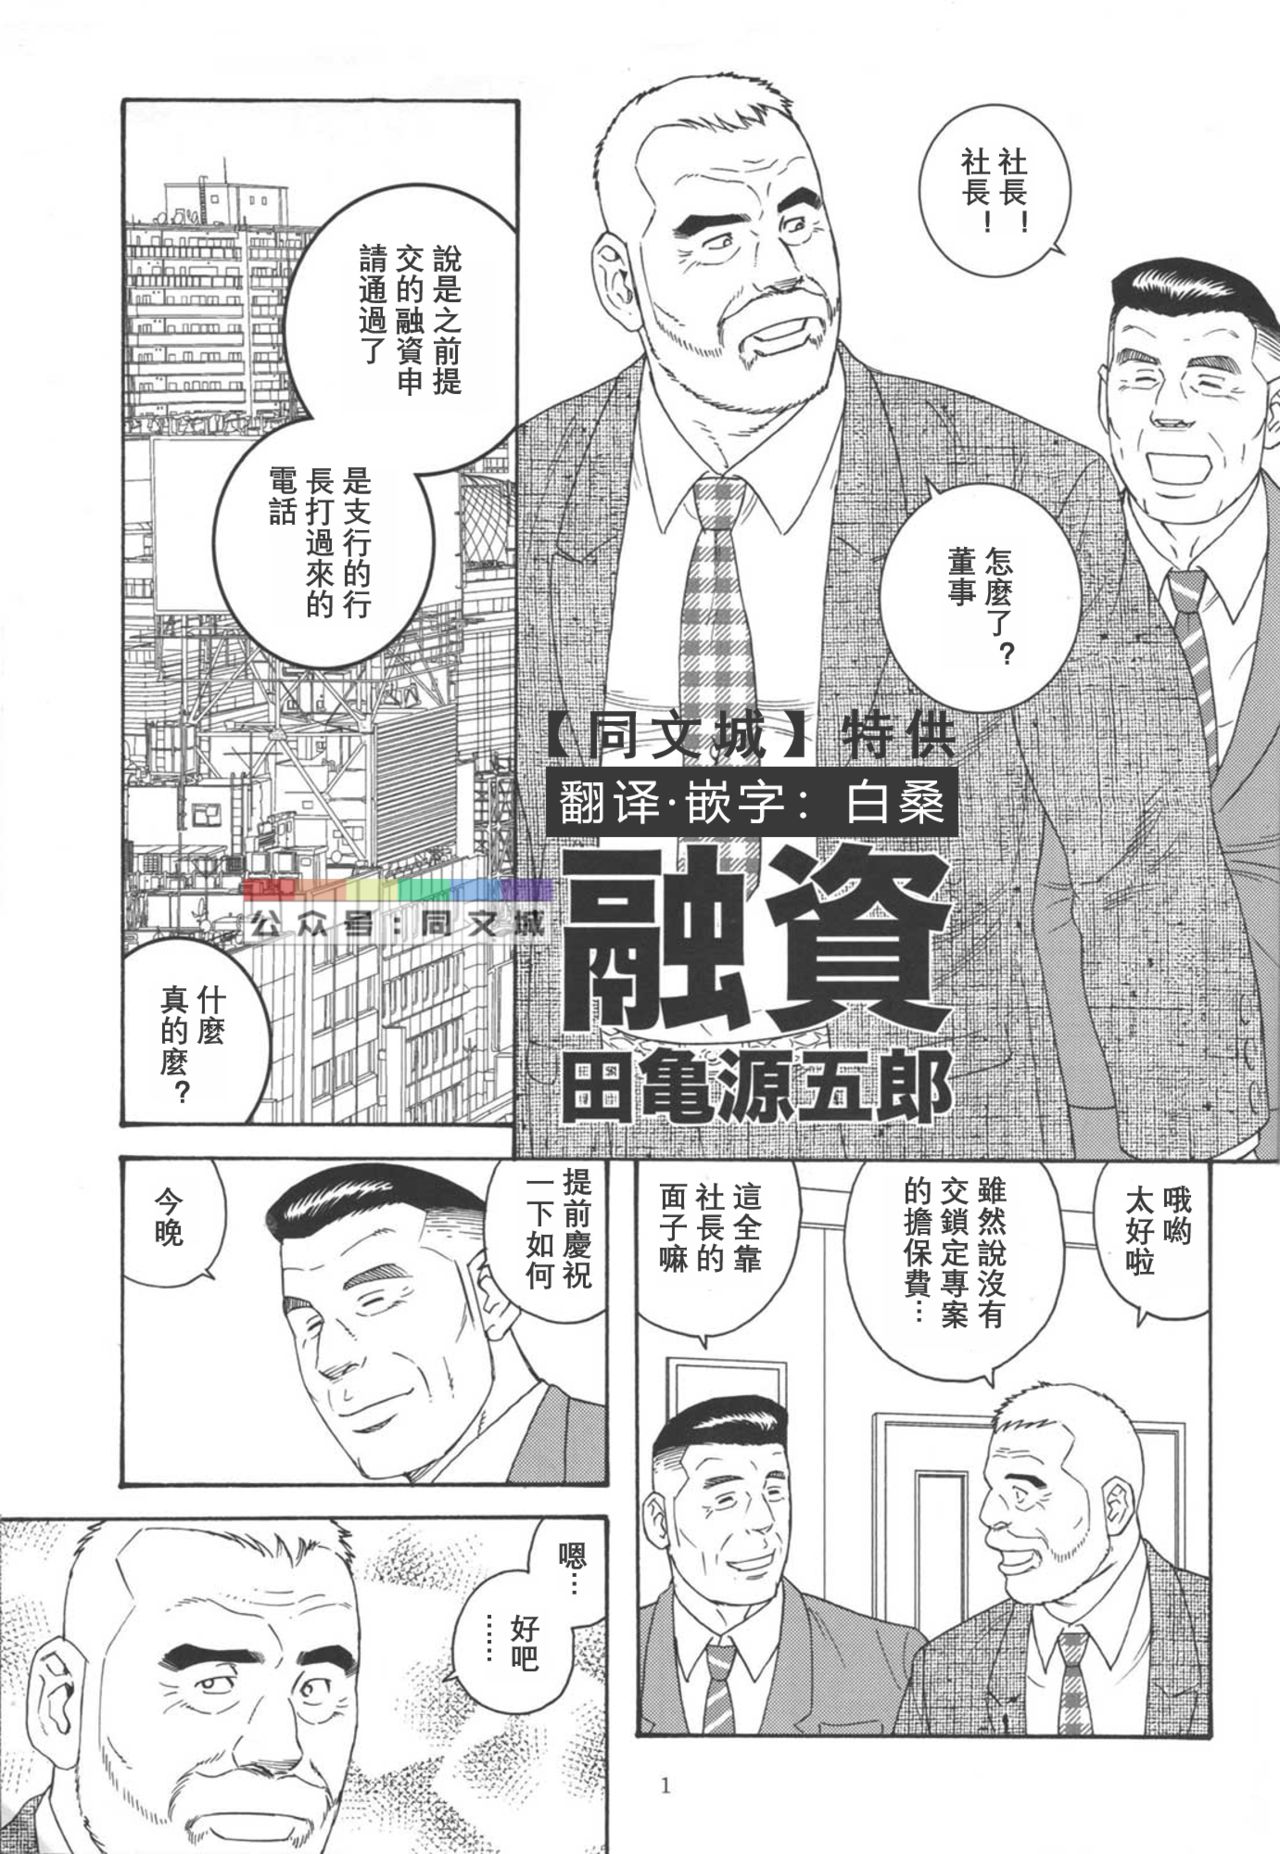 [Tagame Gengoroh] The Loan [chinese] 田亀源五郎_融資